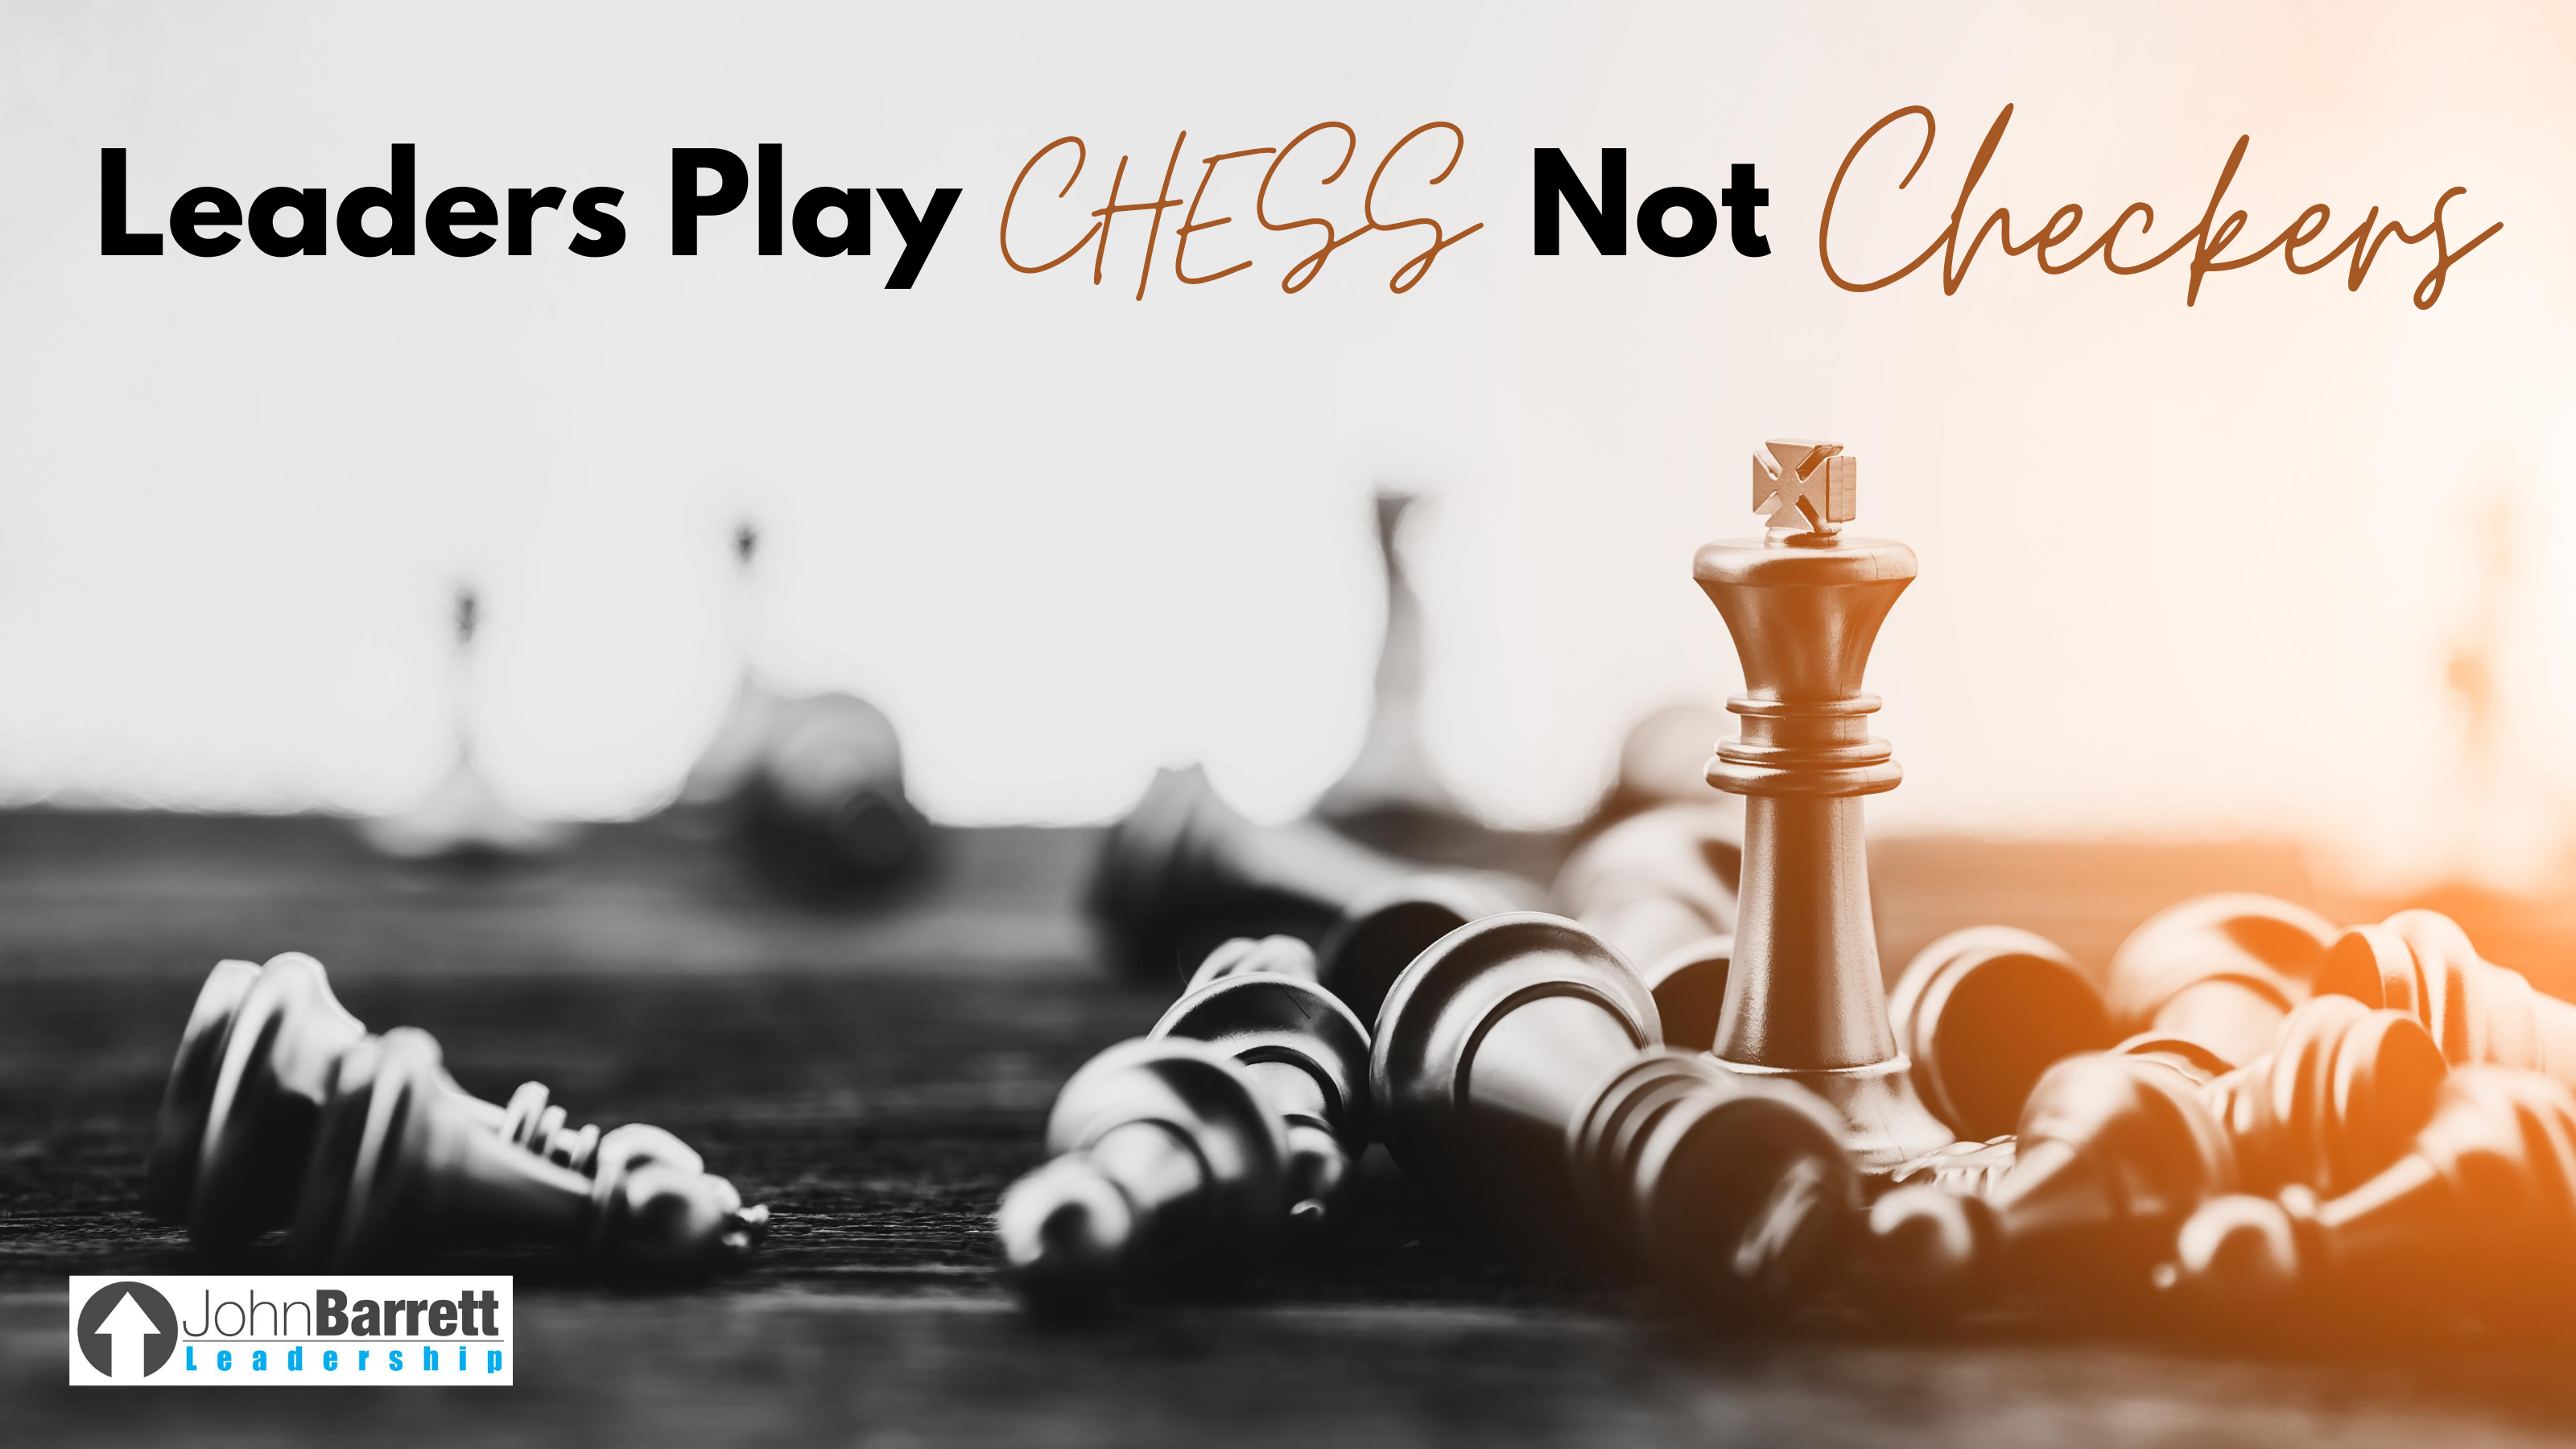 Unbelievable facts  Unbelievable facts, Chess quotes, Chess tricks